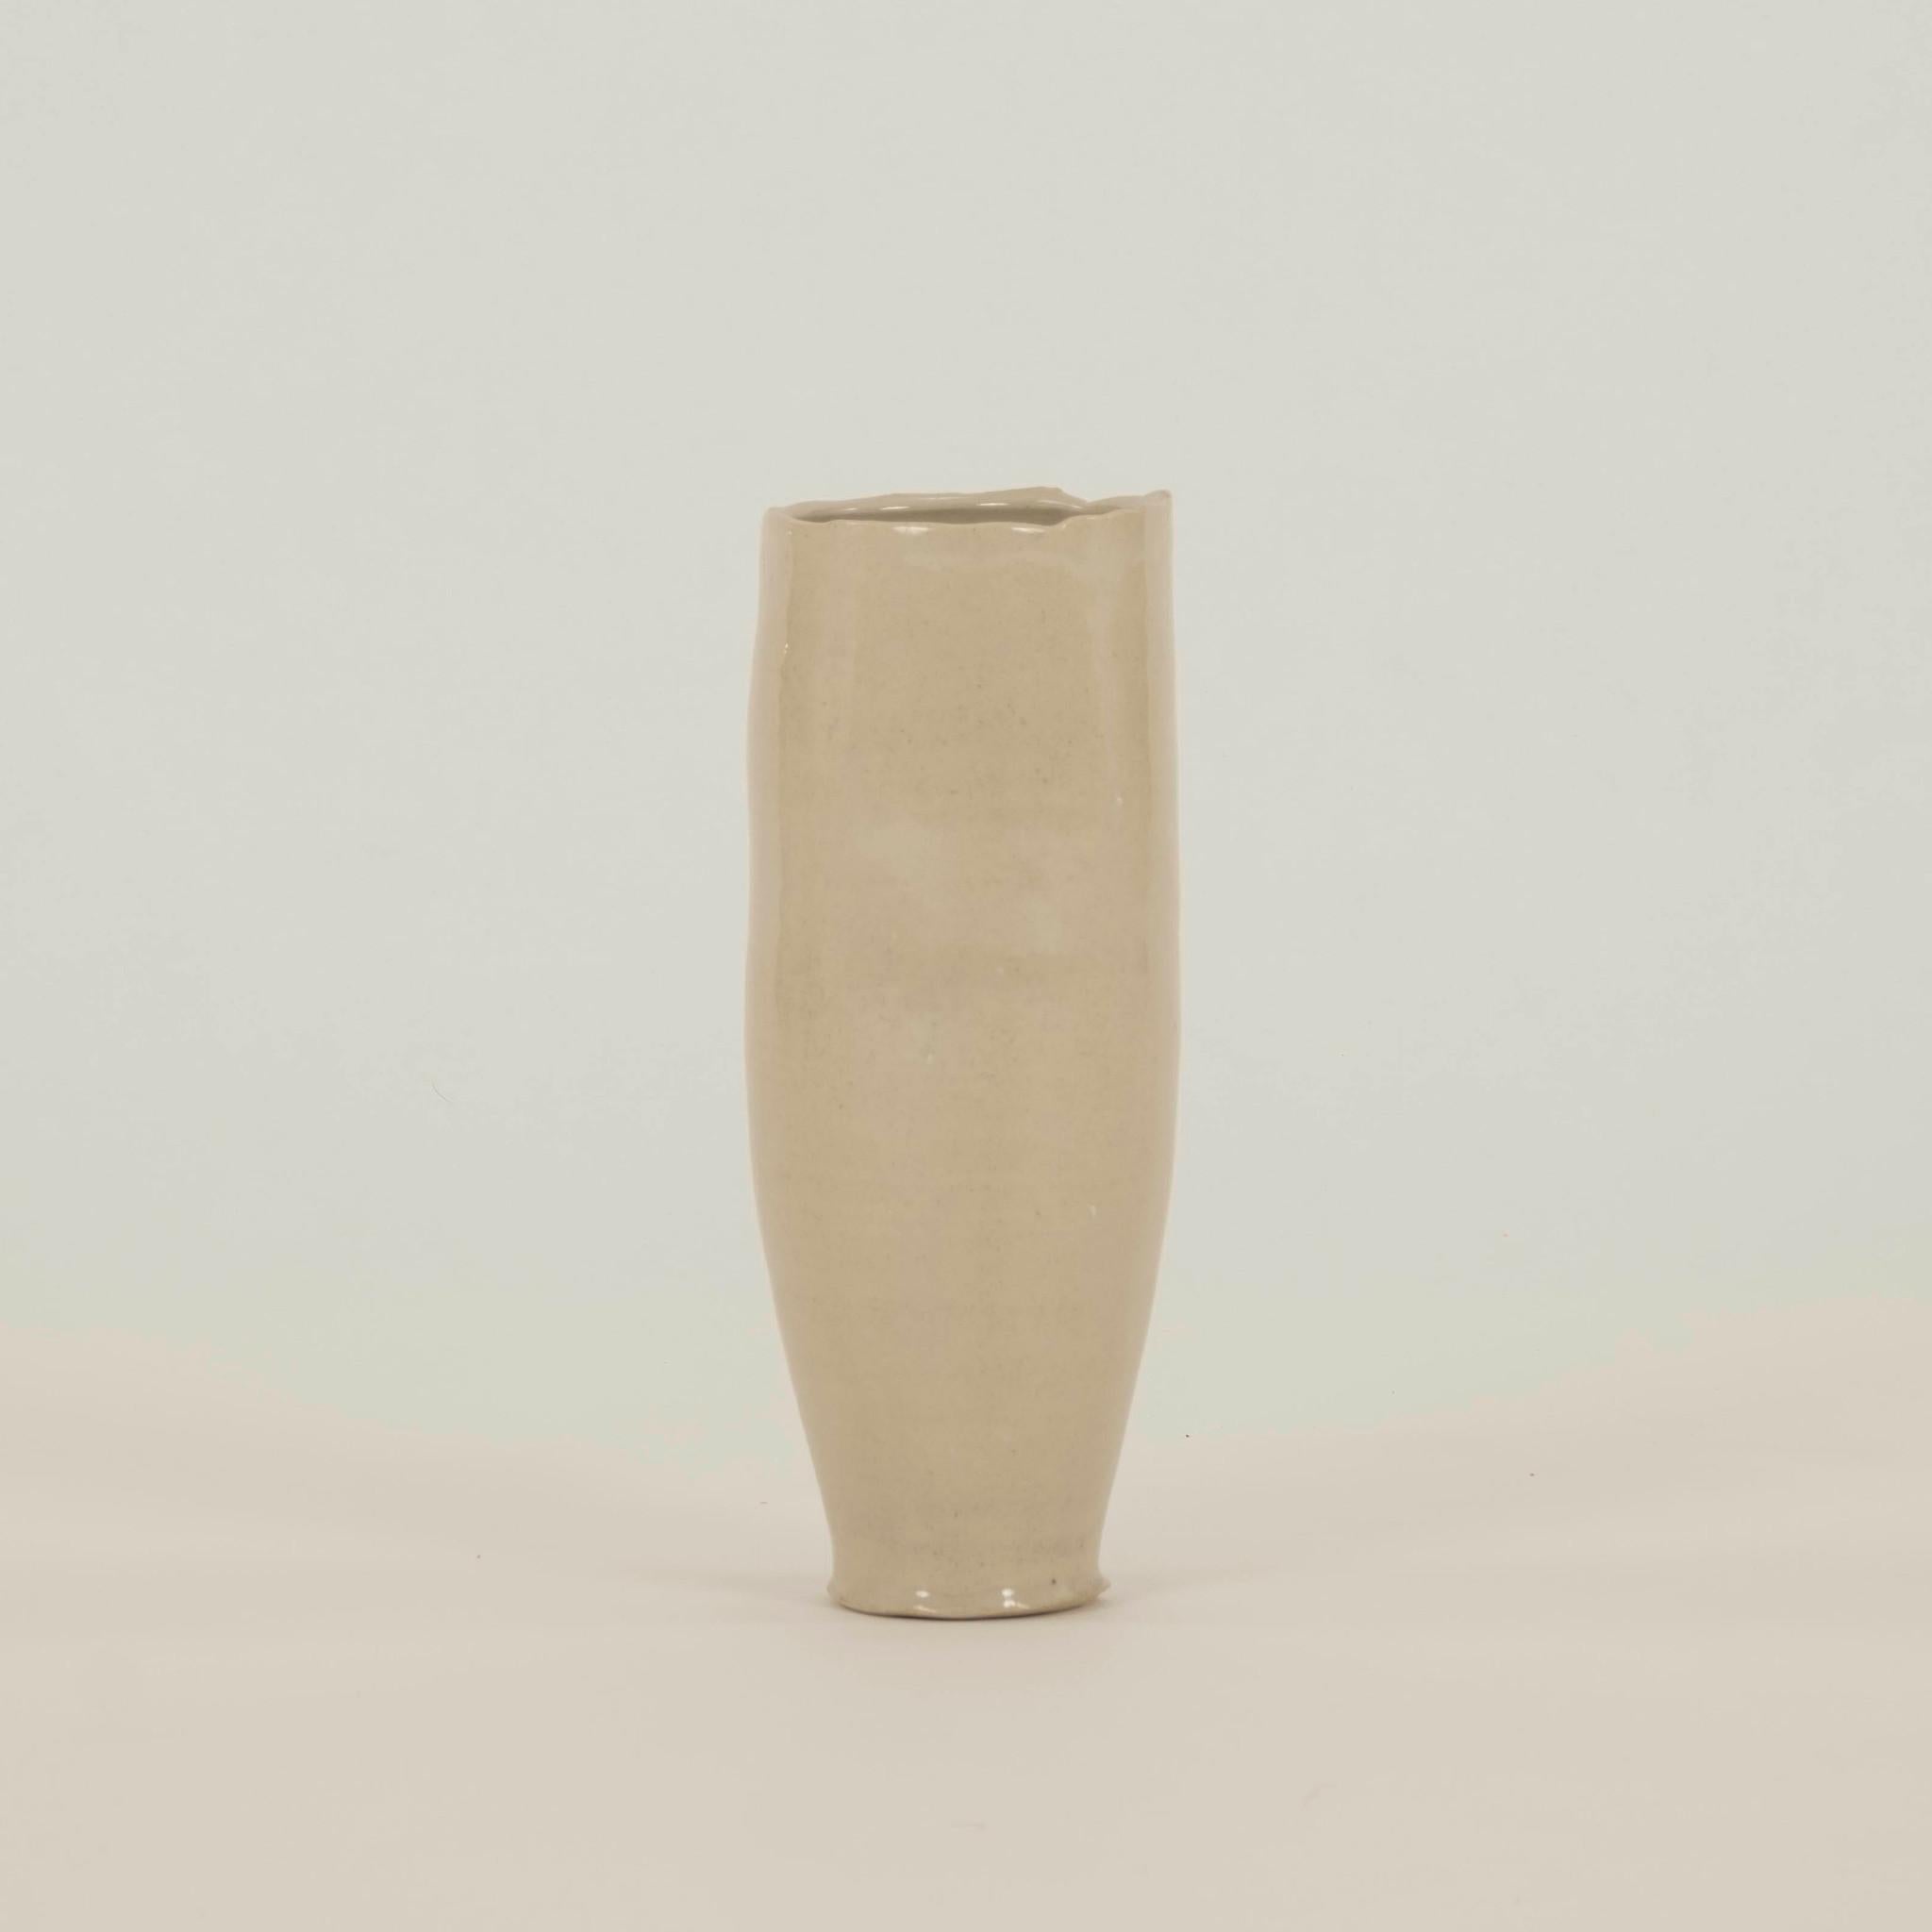 Hand thrown small hole porcelain vase with 24K fire gilt accents.
North America, 21st C
Chase Gamblin

Chase Gamblin is an artist primarily working in ceramics. Currently, he is an Academic Specialist and Studio Coordinator for the Ceramics